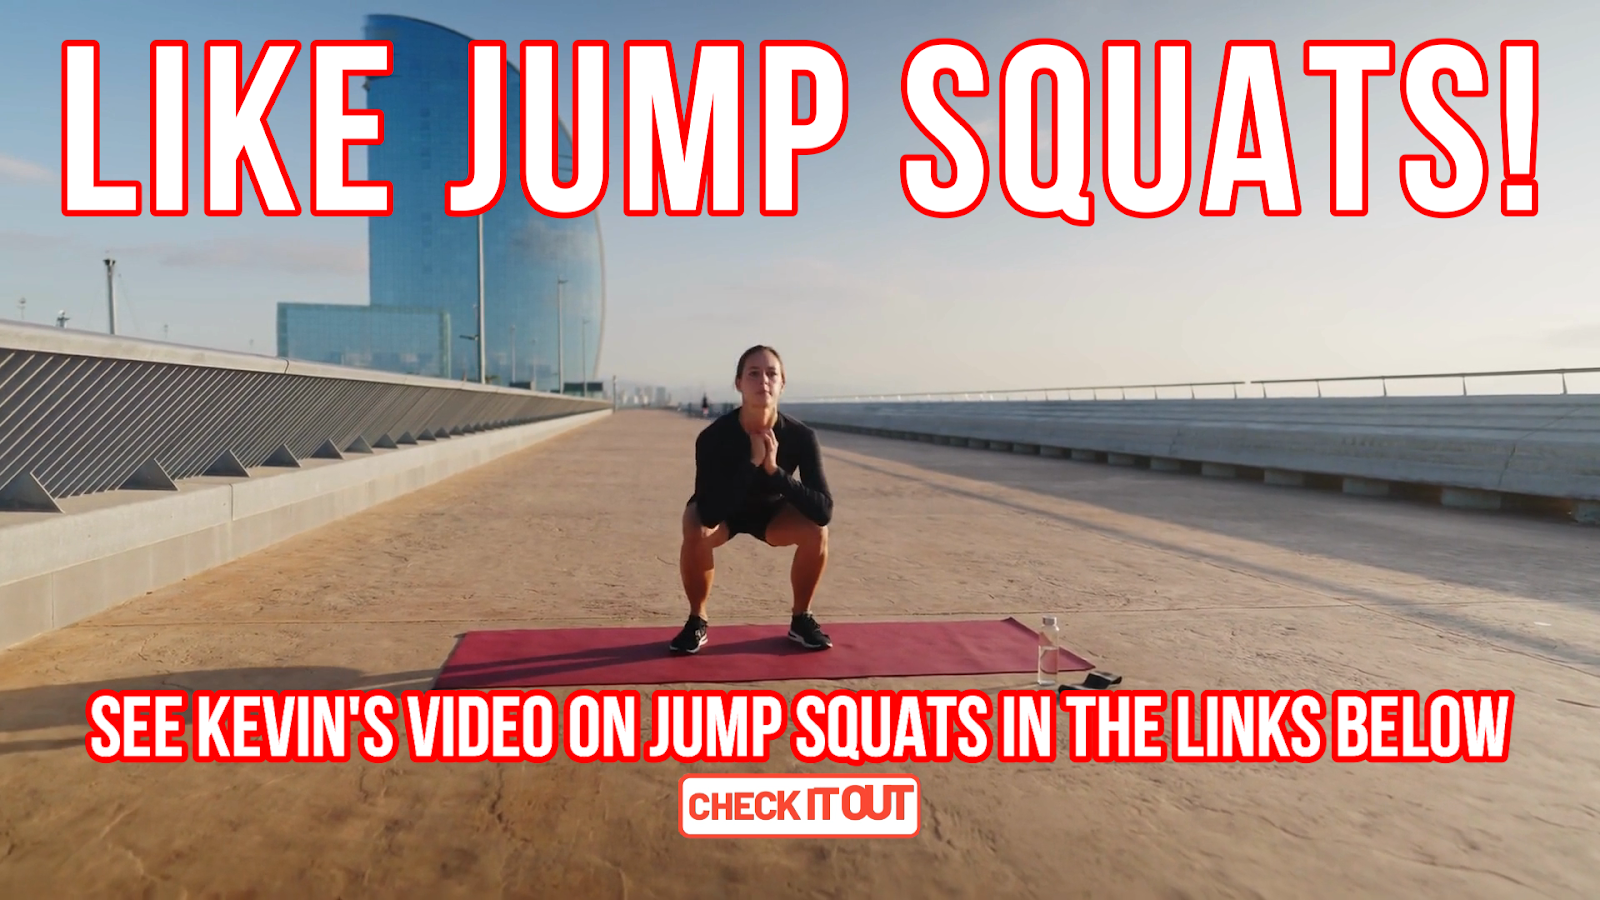 Jump squats are a great exercise to do when you don't have equipment available!